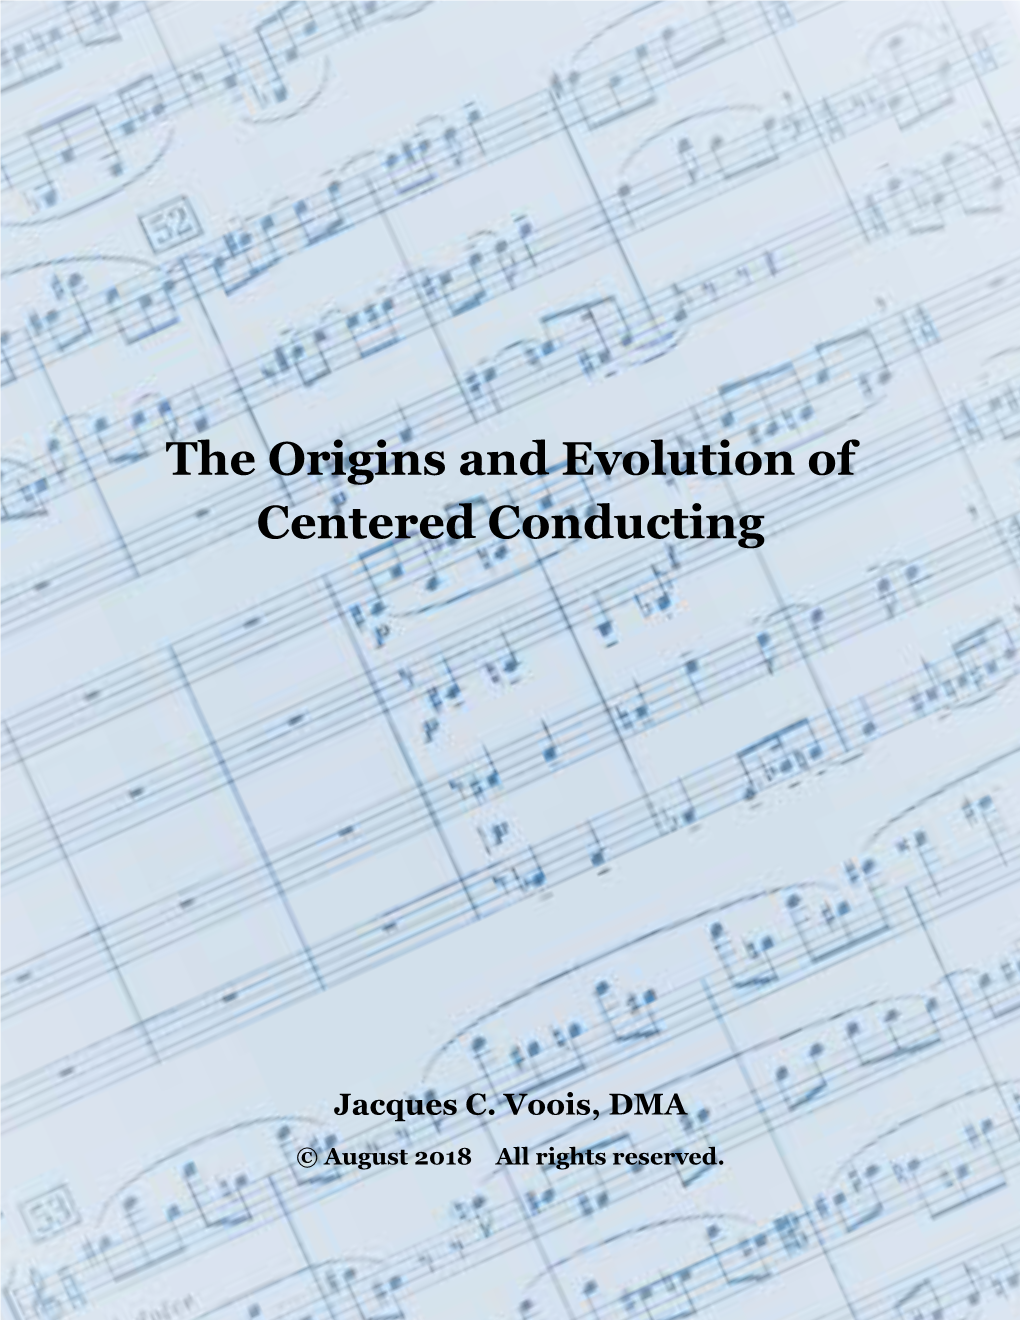 The Origins and Evolution of Centered Conducting